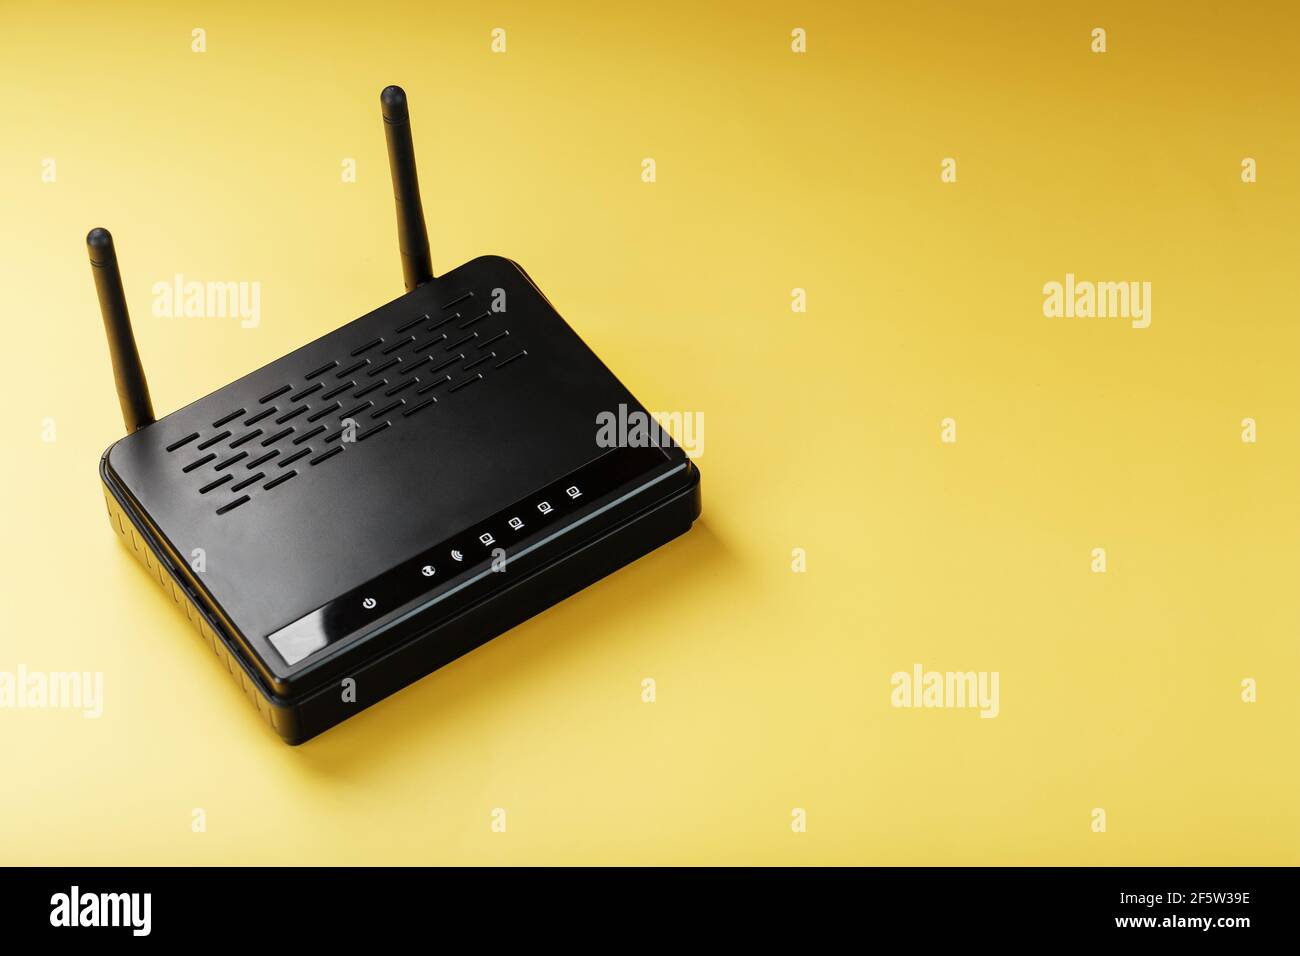 Router wireless LAN technology with devices based on IEEE 802.11 standards on a yellow background free space top view. Isolate Stock Photo